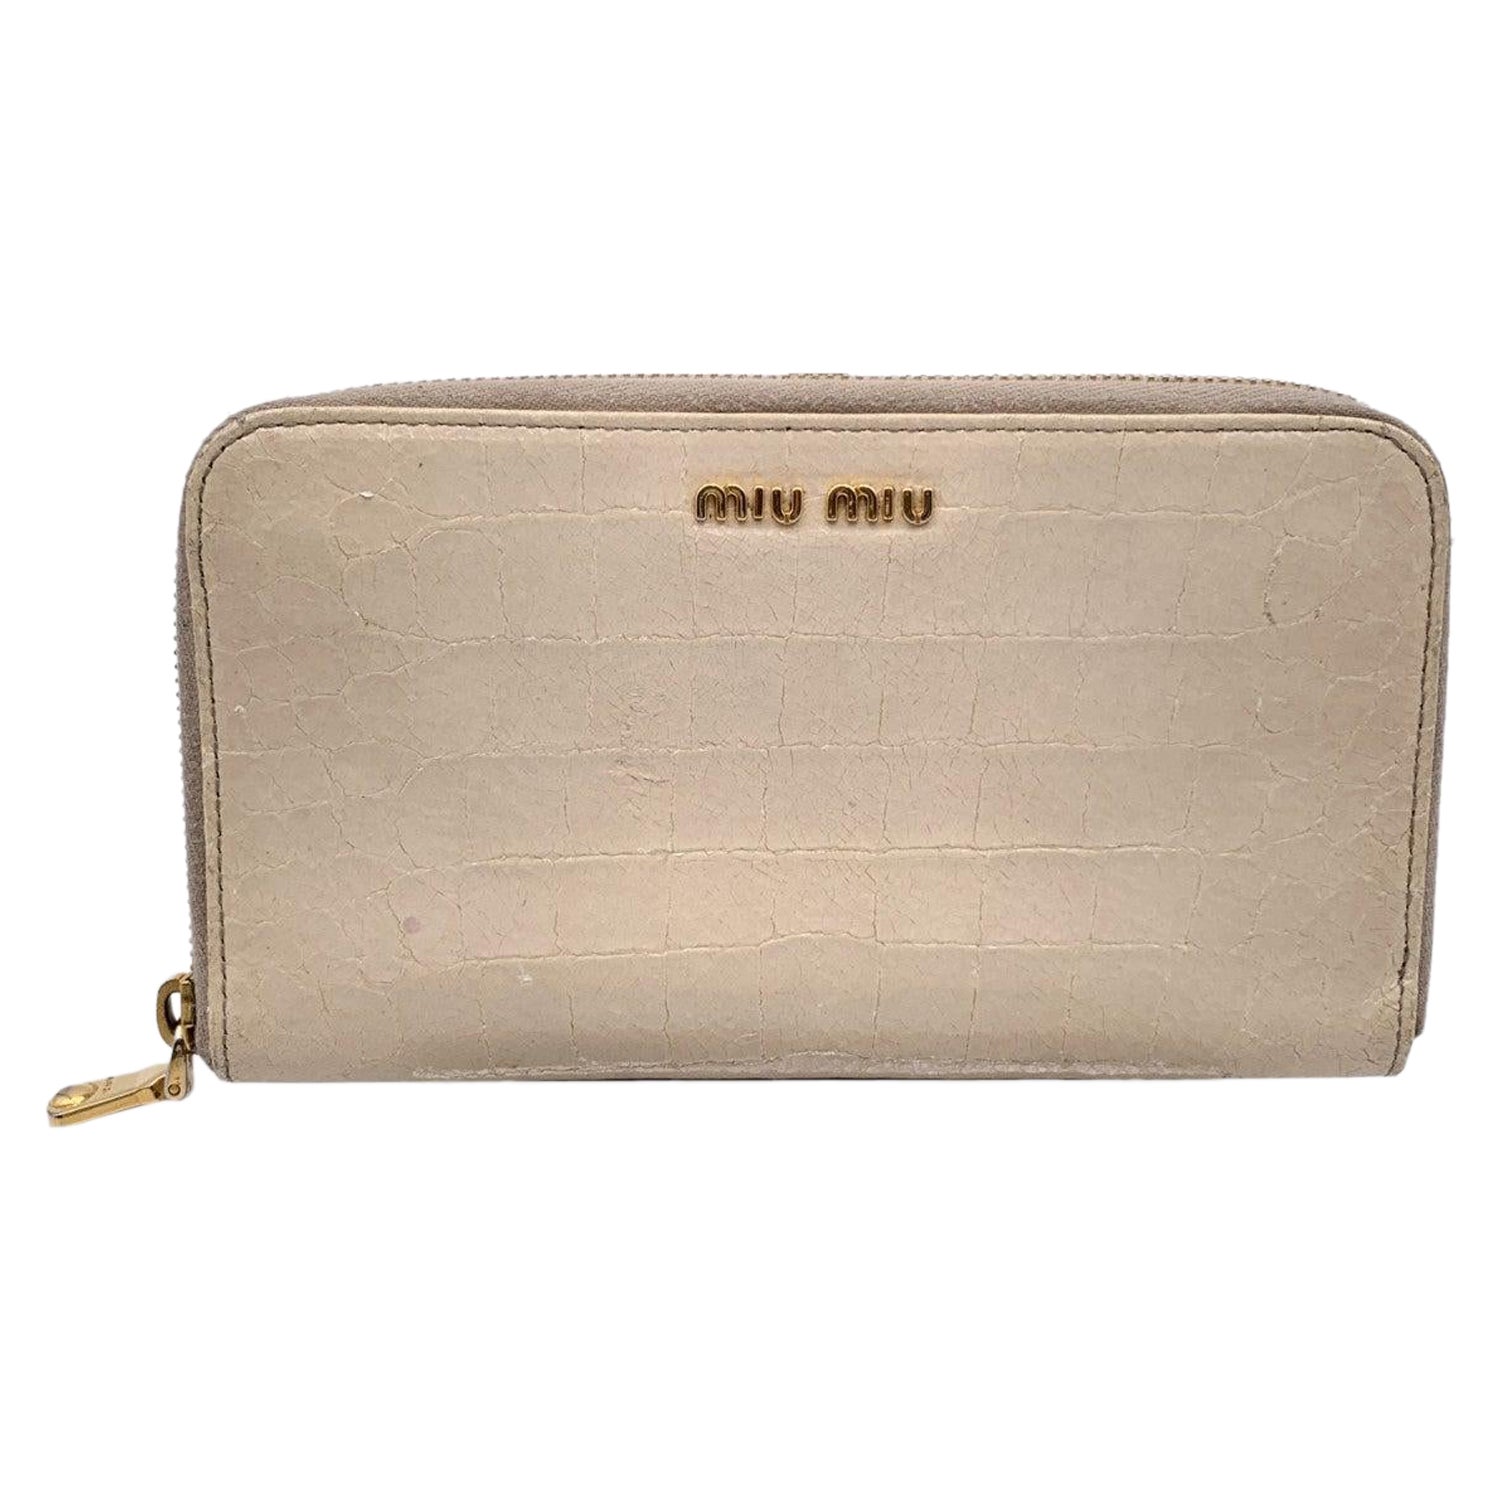 Miu Miu Light Beige Embossed Leather Zippy Long Continental Wallet For Sale